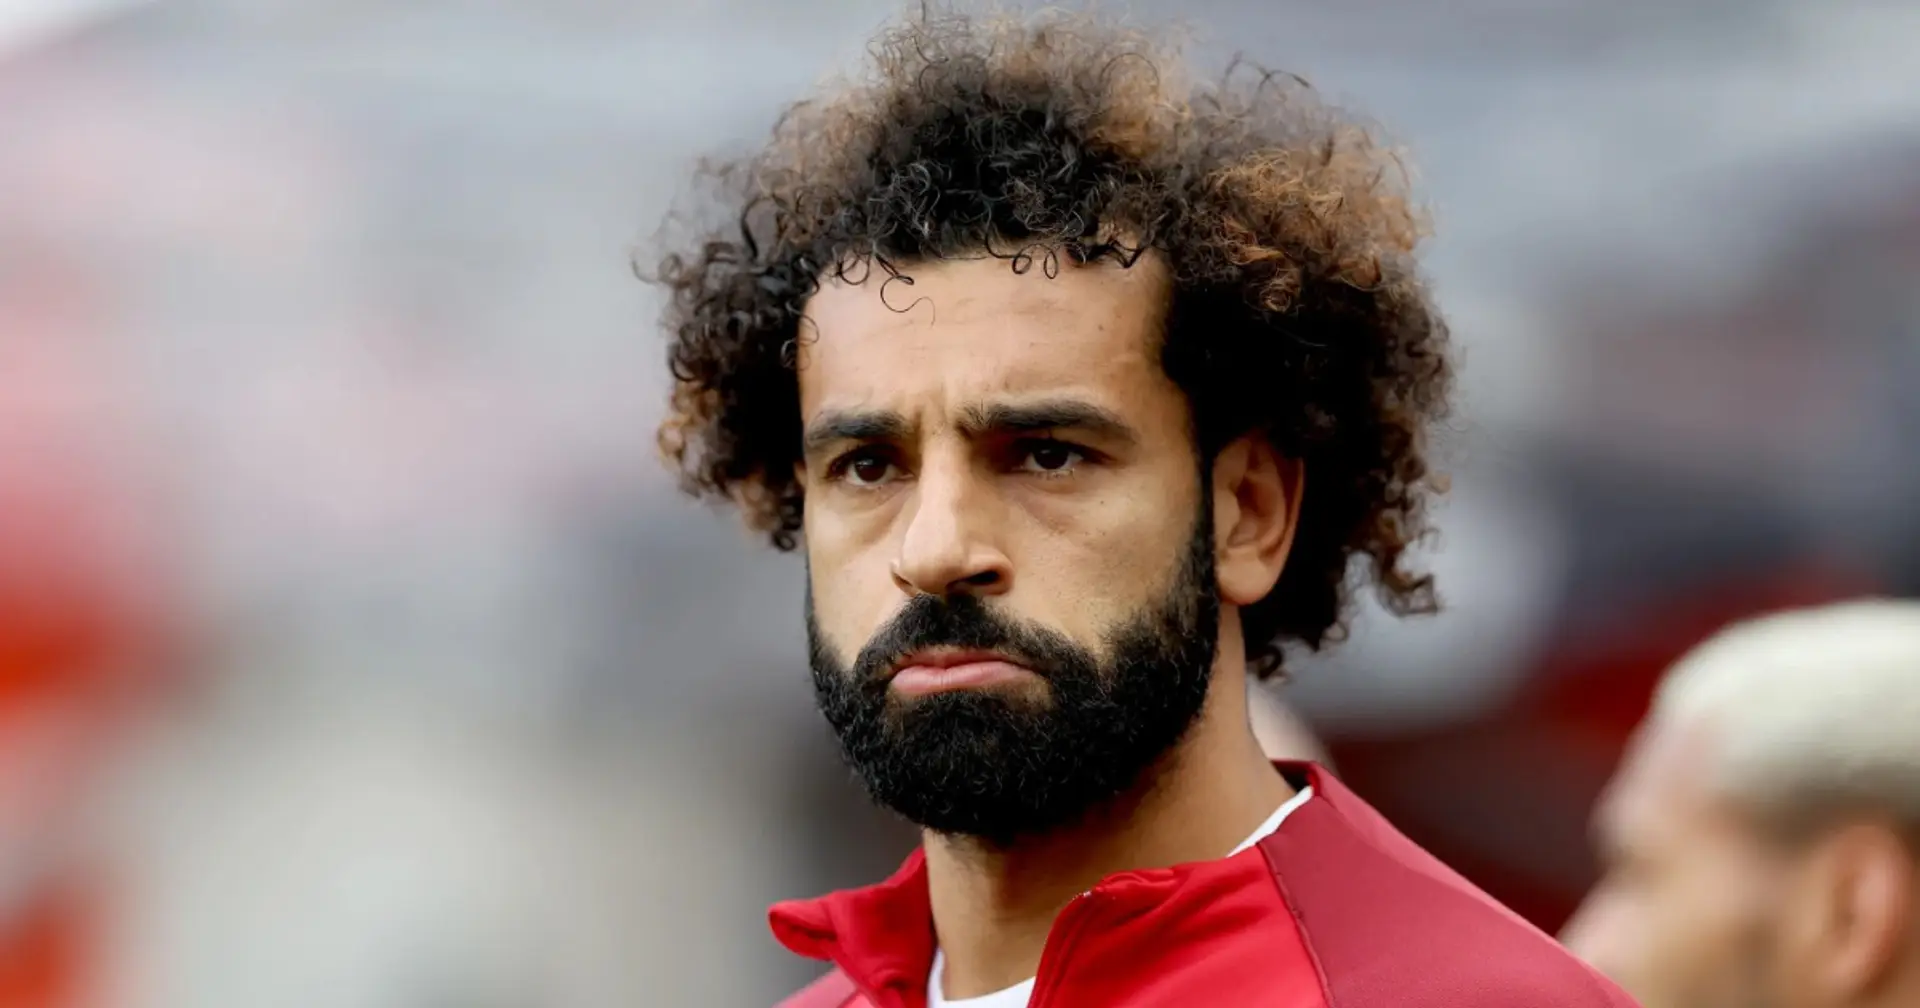 Salah slammed for leaving Egypt camp after injury: 'Should've stayed even if he only had one leg'